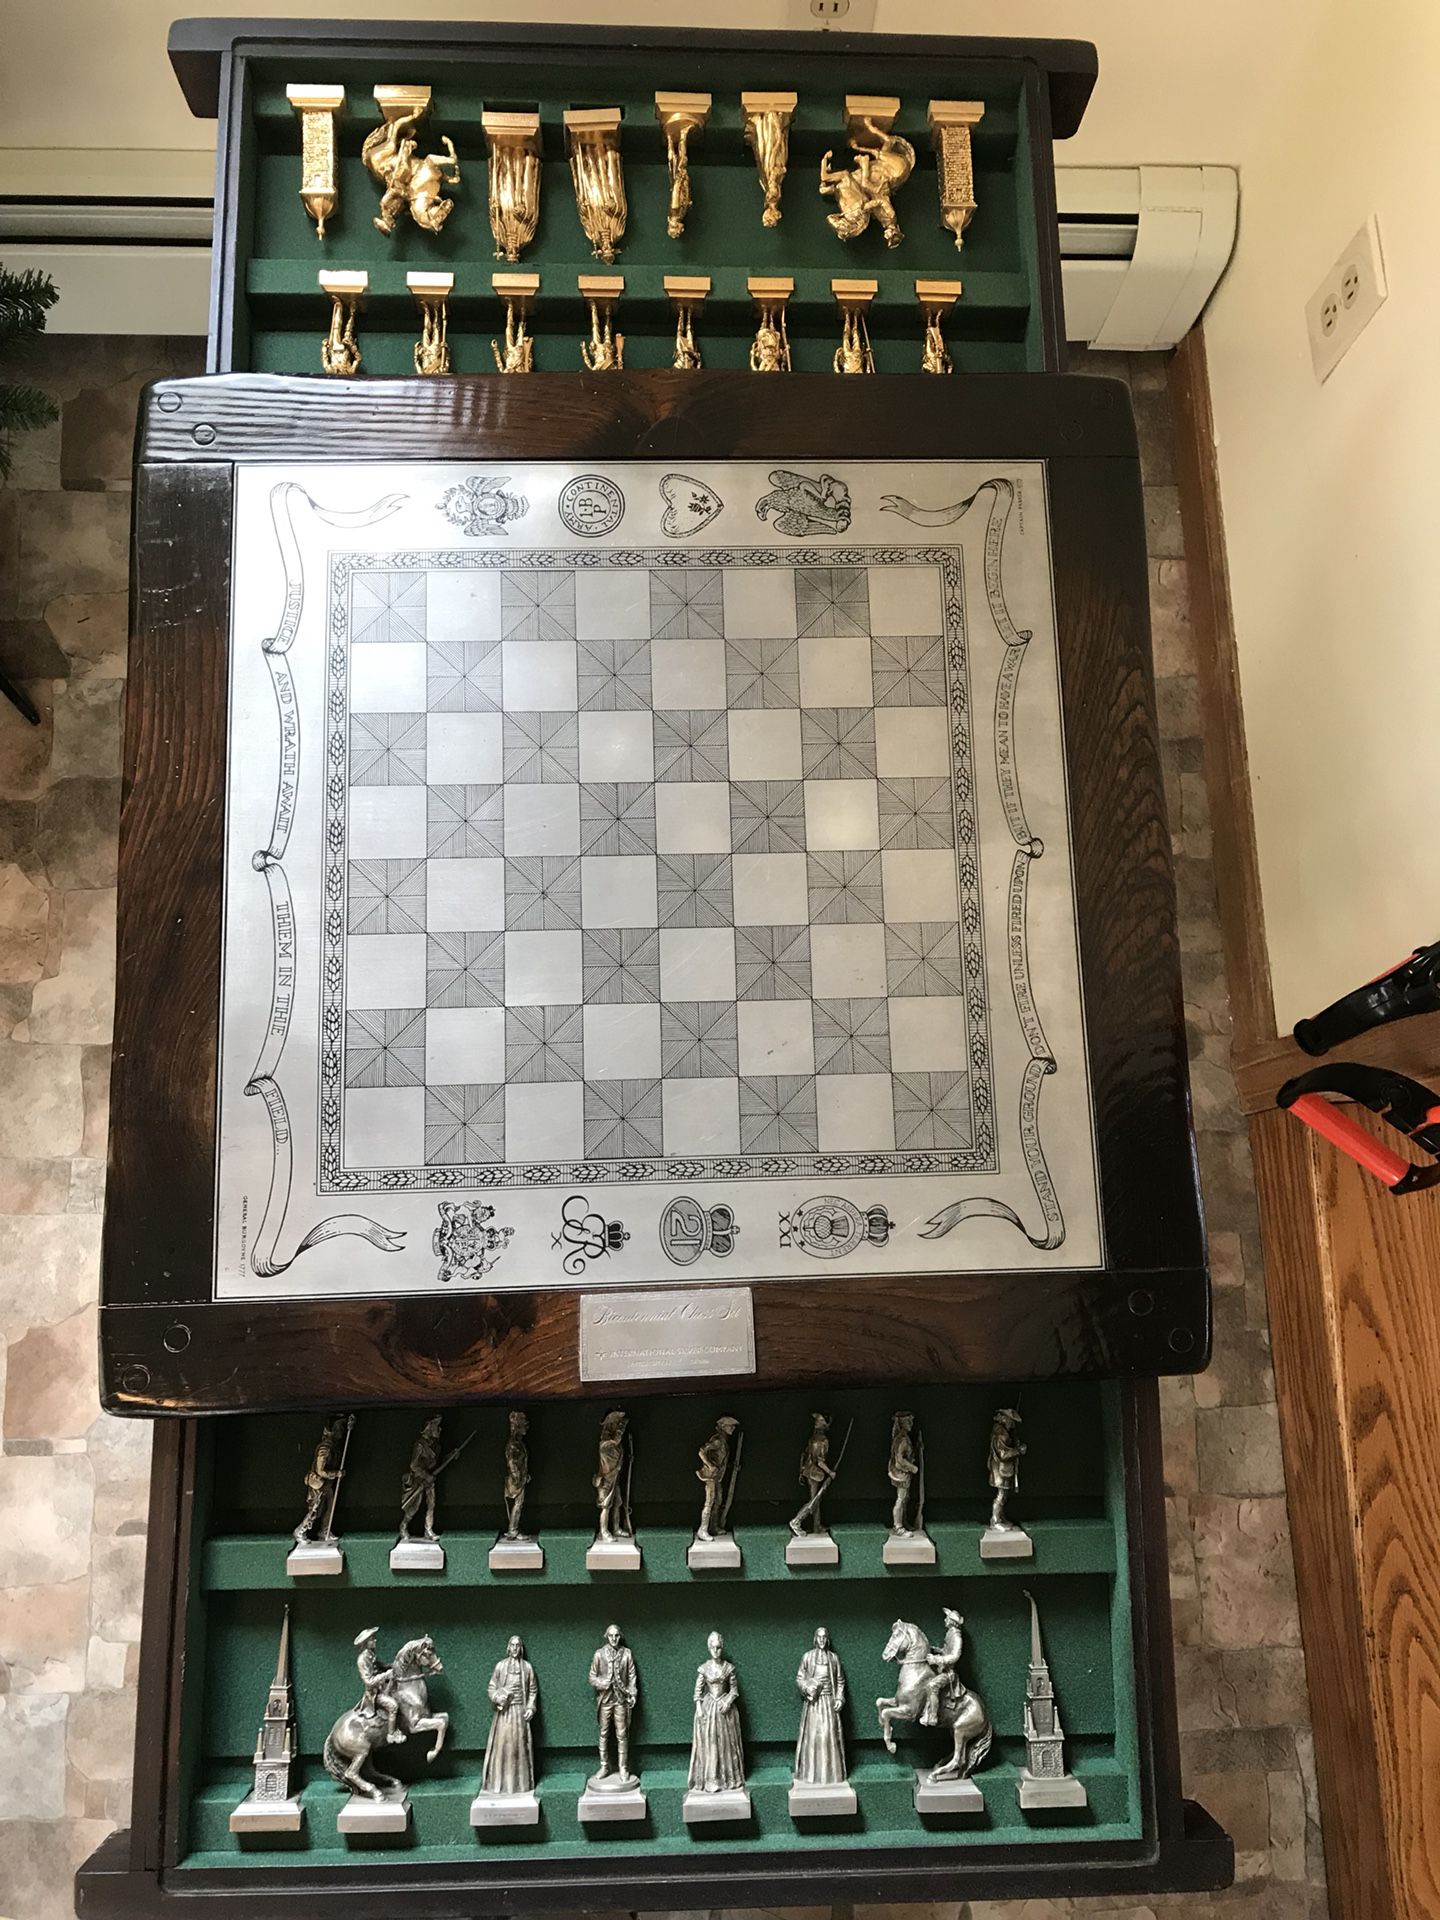 1776-1976 bicentennial chess set. One of 500 made by the international silver company in Wallingford number 317. Each piece is 4 inches high one side